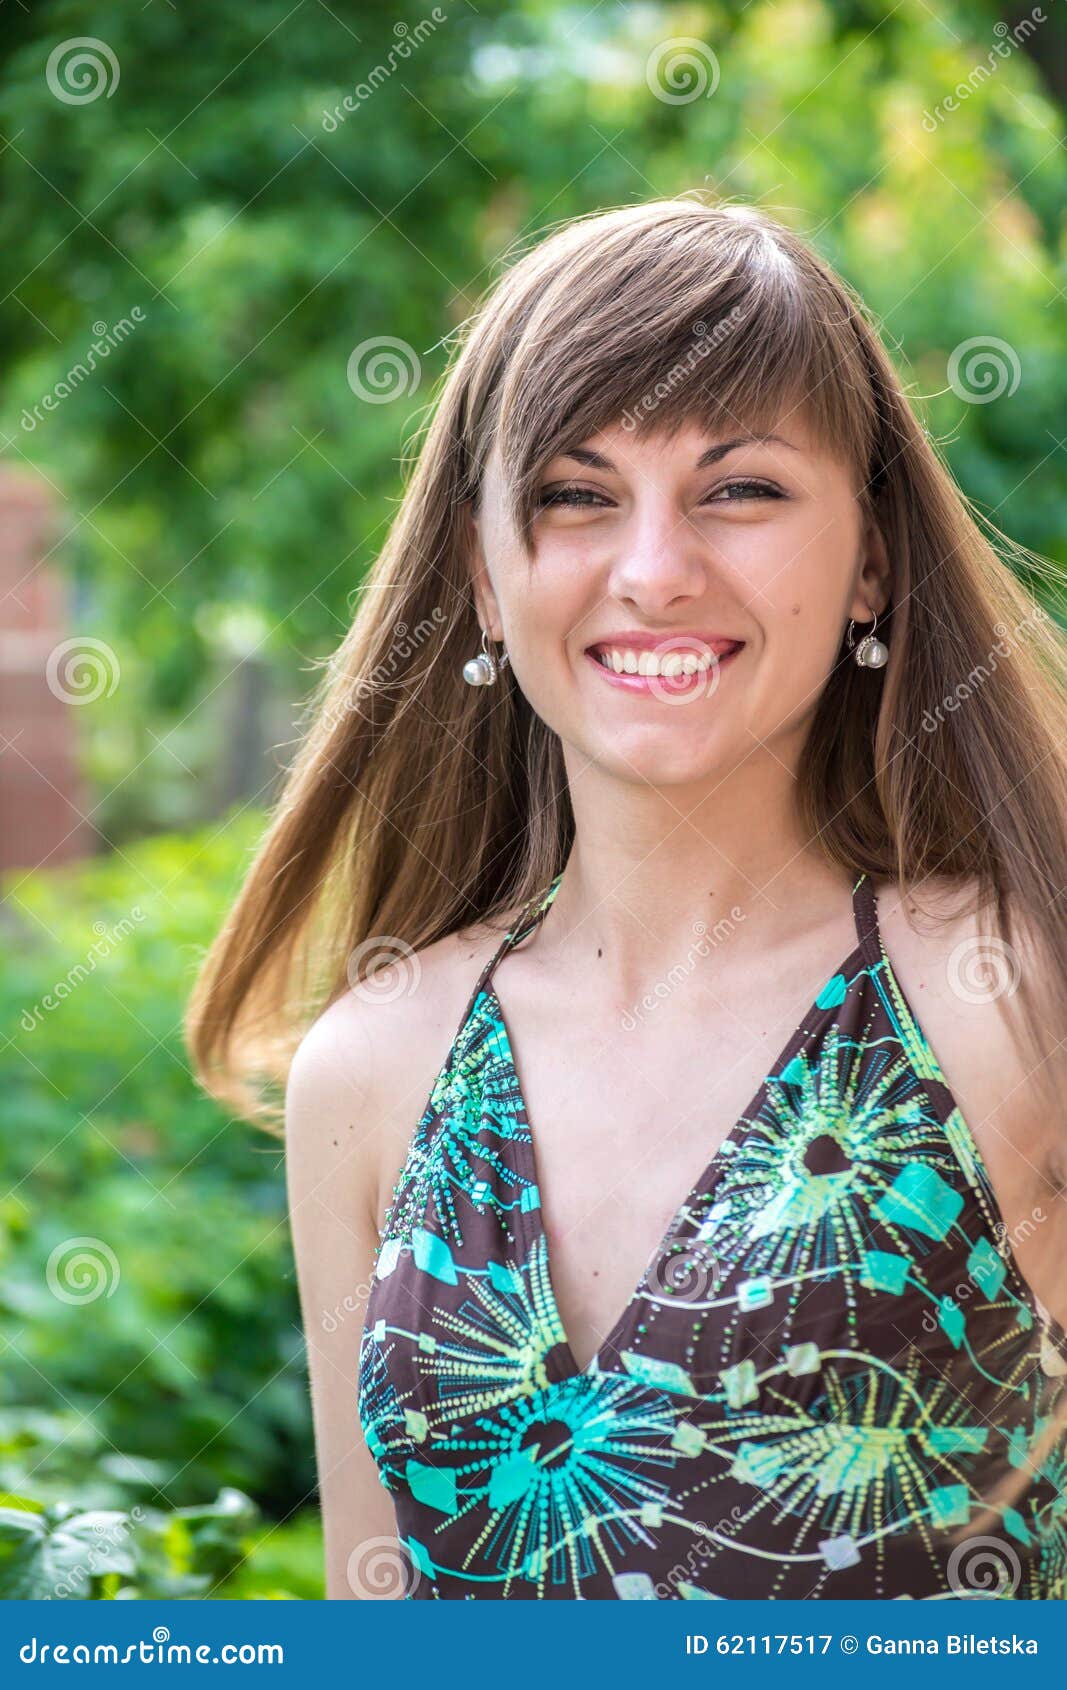 Beautiful Young Girl with Long Hair and a Nice Smile. Stock Image ...